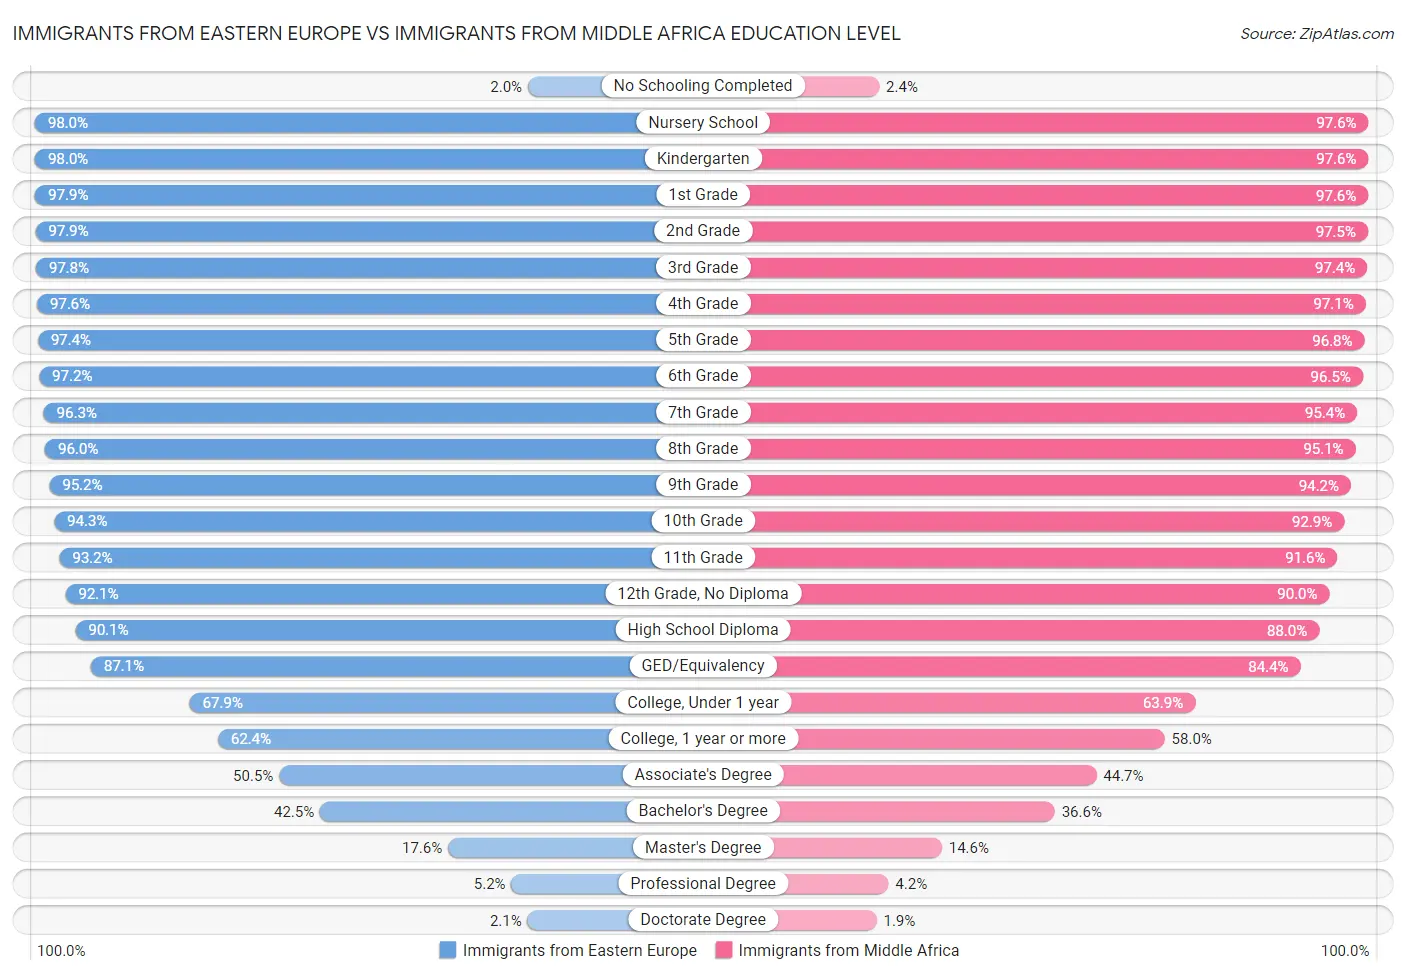 Immigrants from Eastern Europe vs Immigrants from Middle Africa Education Level